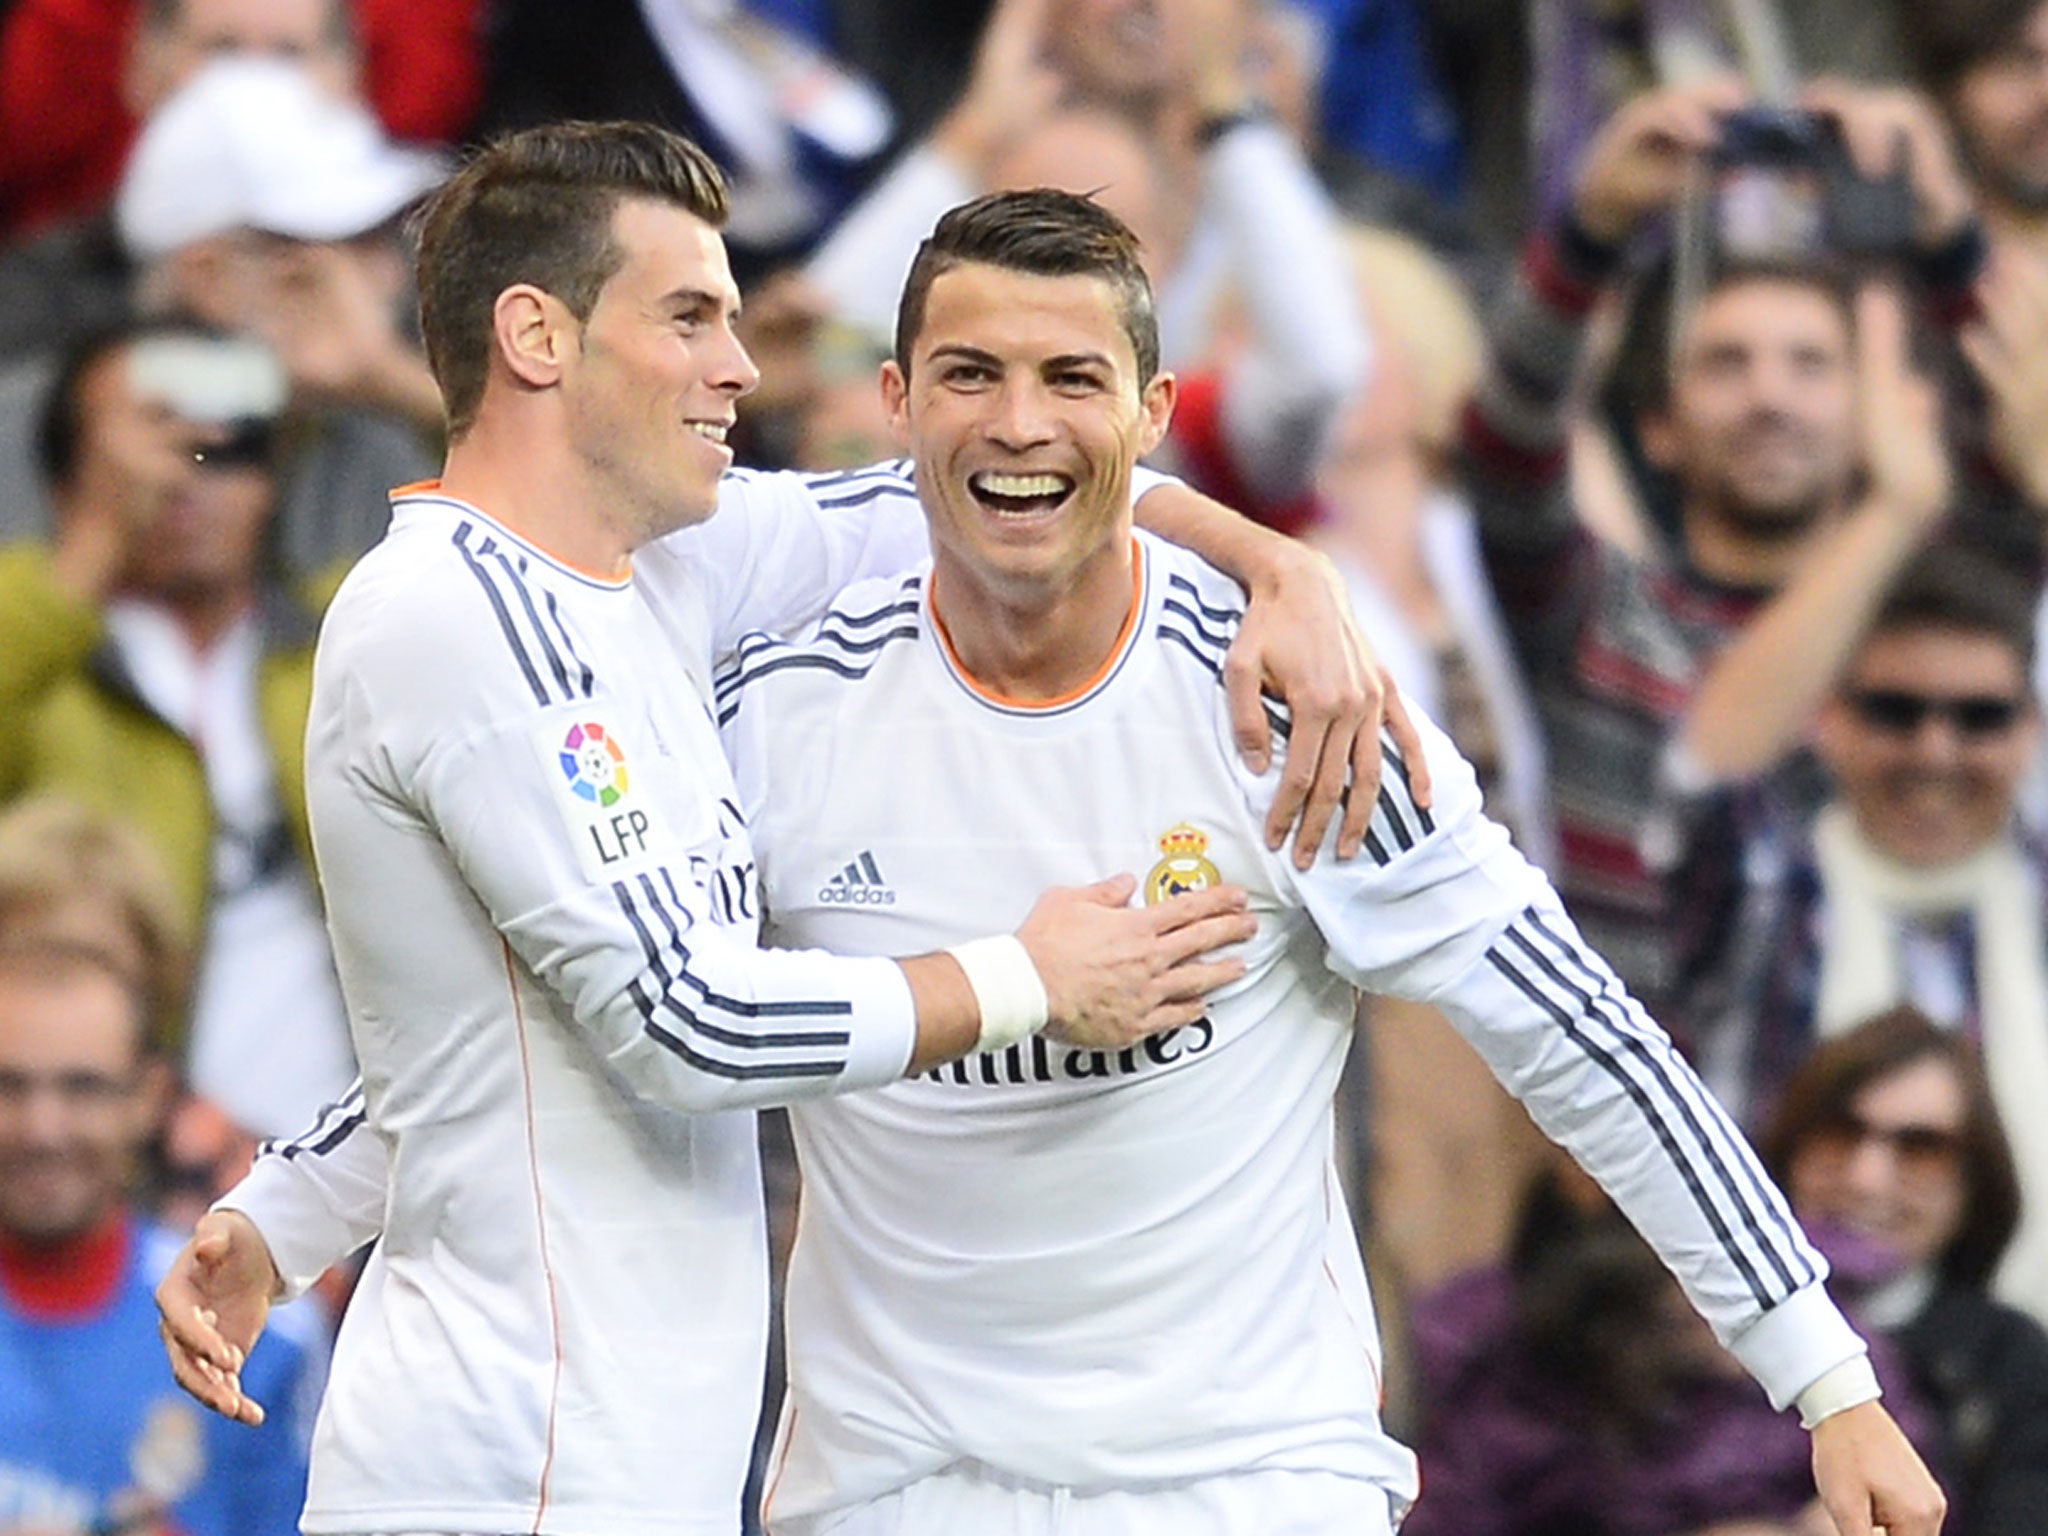 Cristiano Ronaldo (right) celebrates his first goal in the 5-1 win over Real Sociedad with Gareth Bale on Saturday